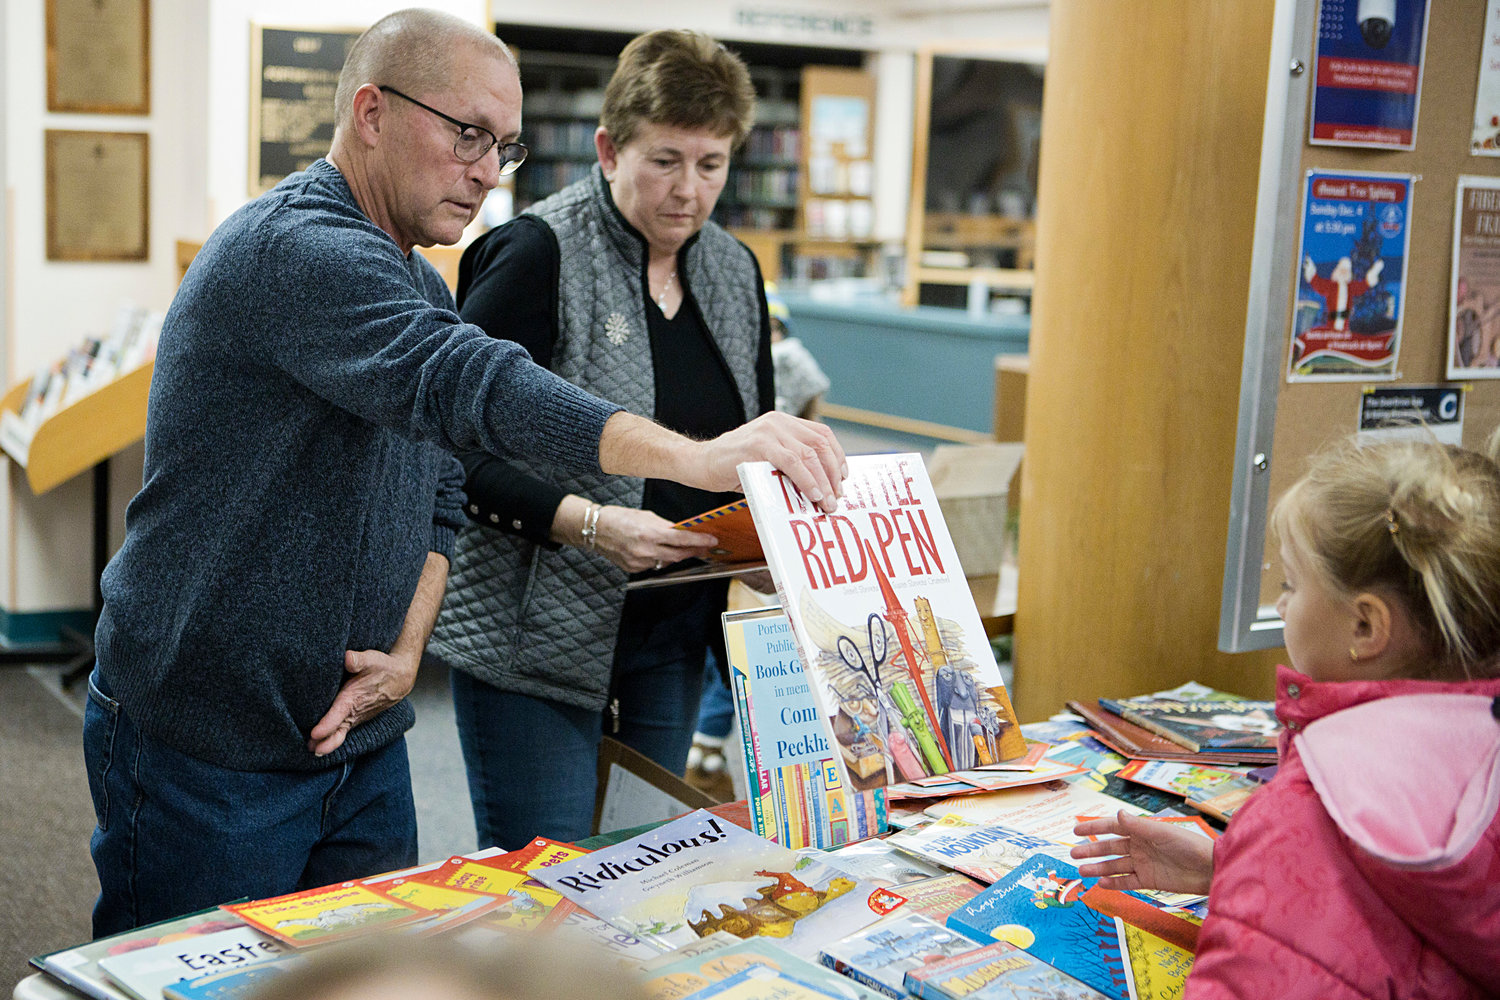 Dwayne and Patricia Peckham brought a tableful of books for children to take home for free in memory of their late son, Connor. Connor, a popular student and band member at Portsmouth High School who organized a book giveaway during the library’s 2018 tree-lighting for his senior project, died the following year at the age of 18.